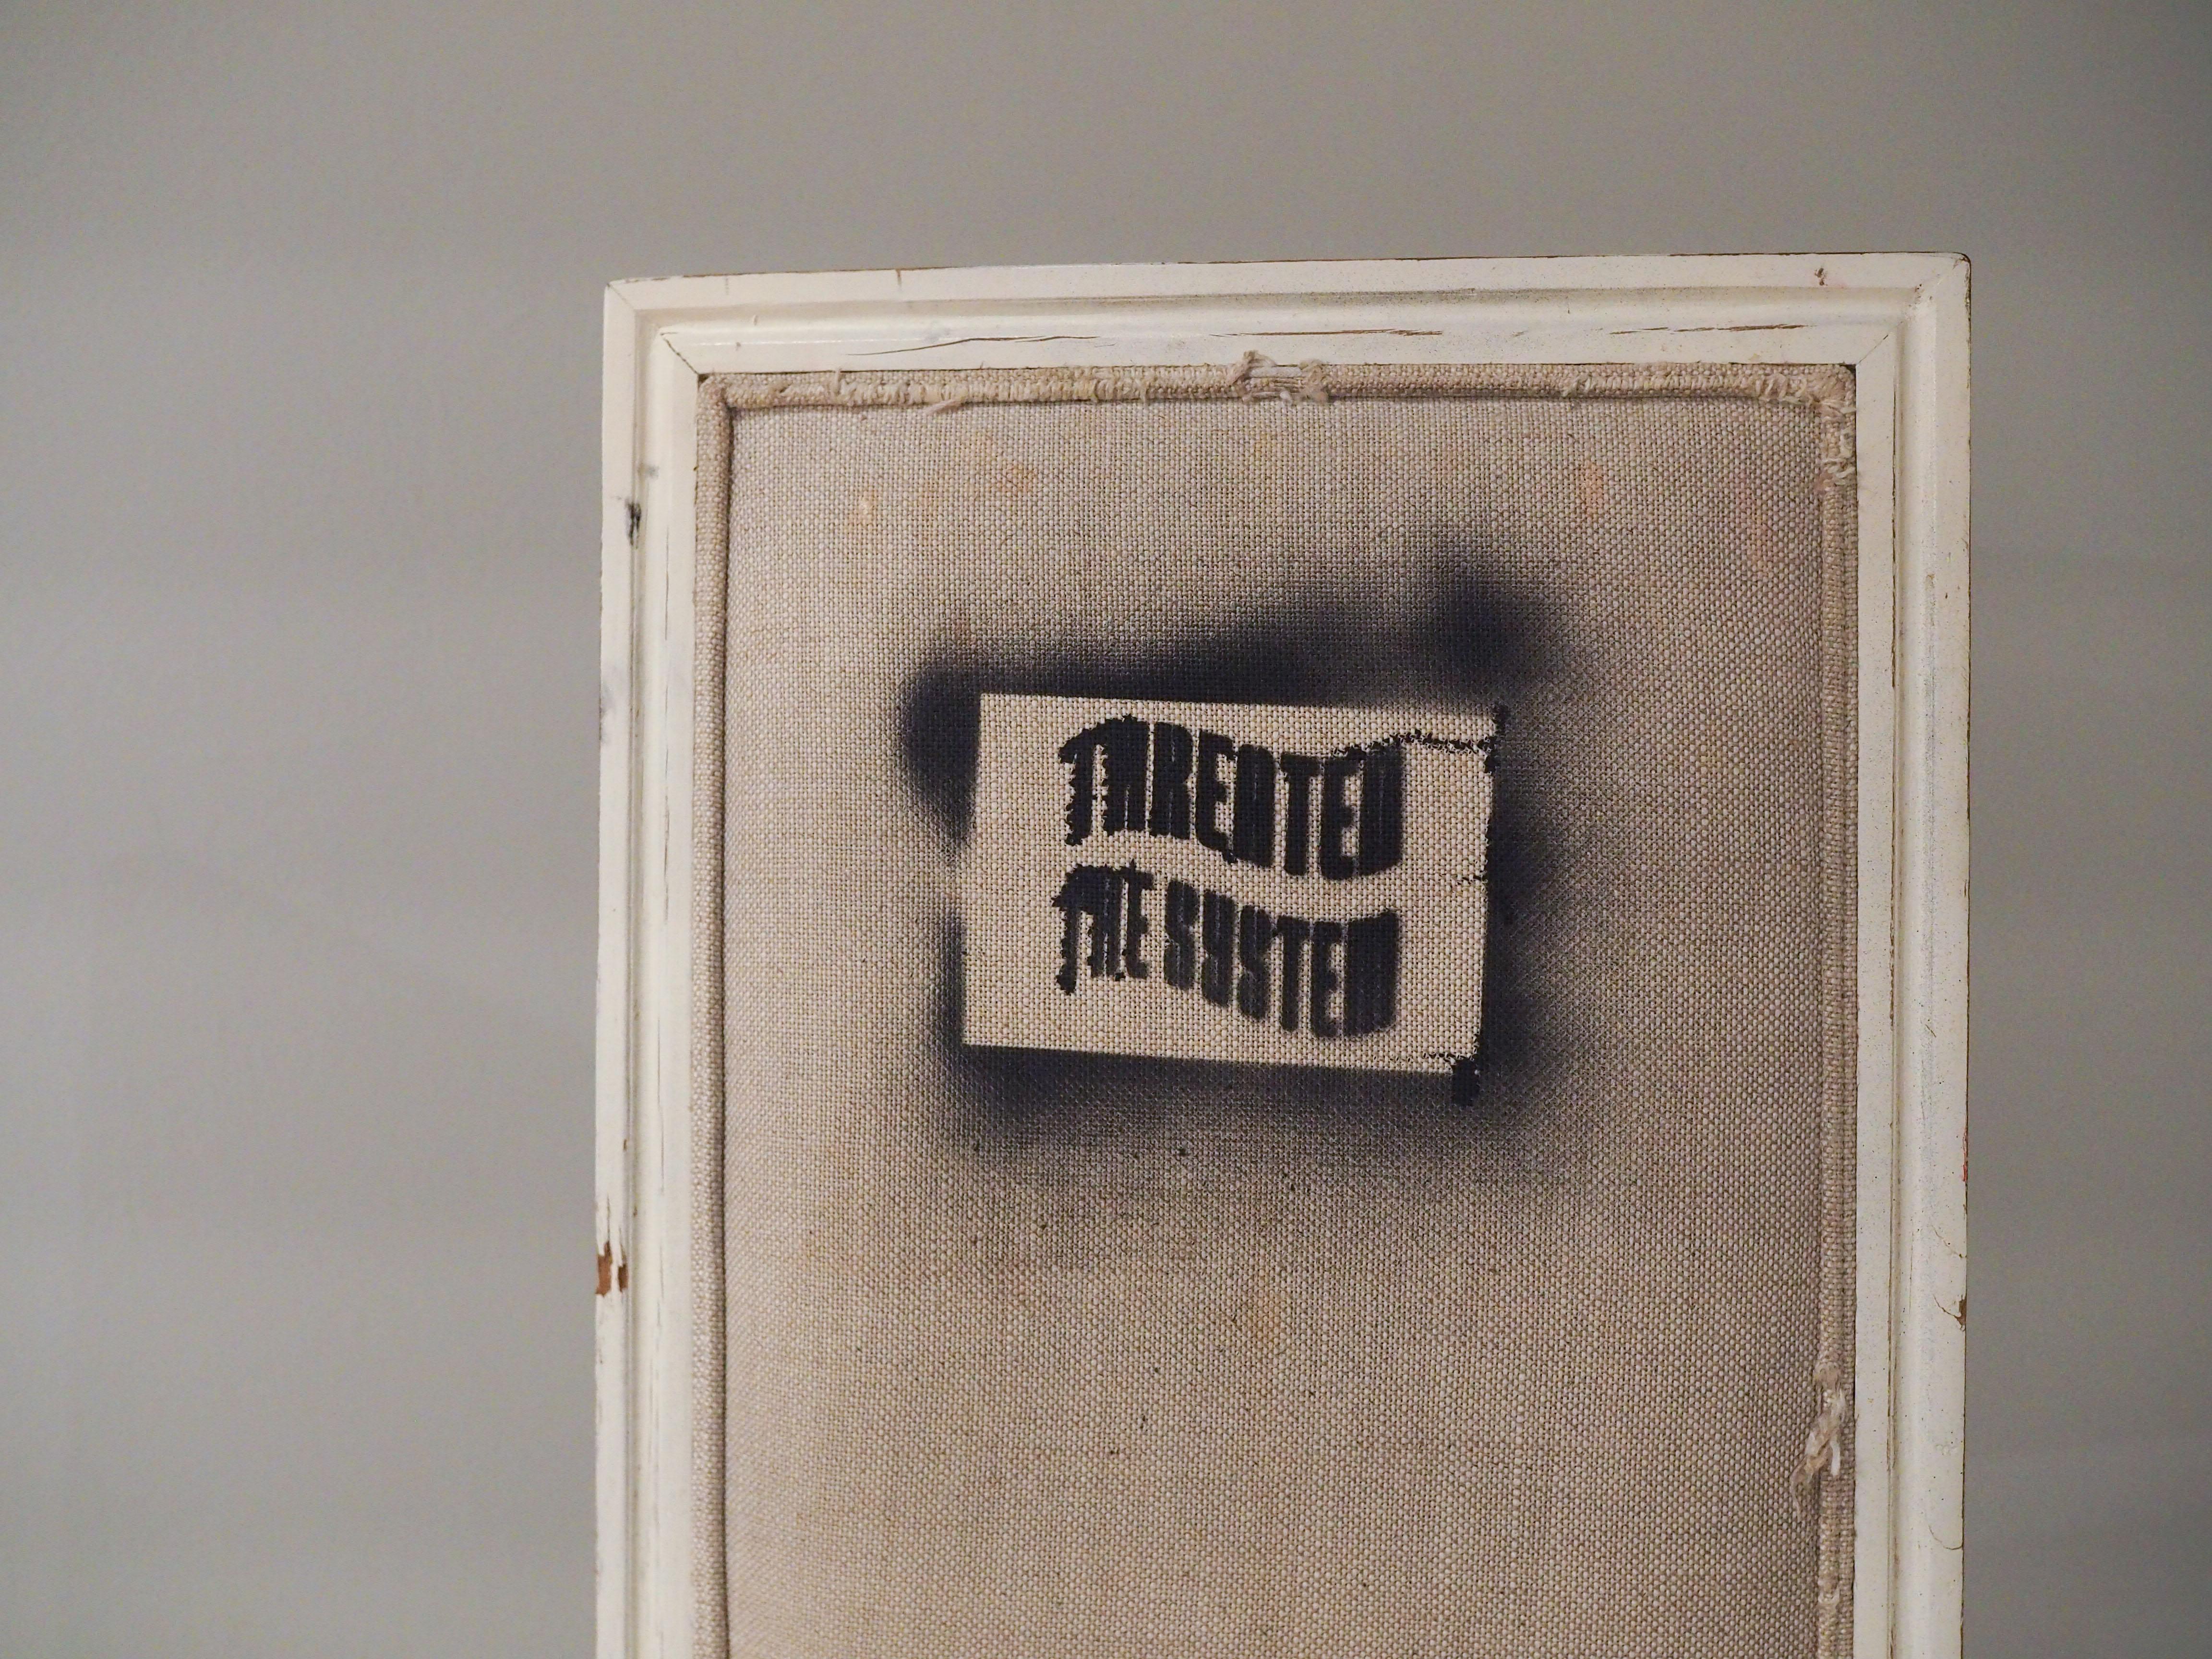 A chair spray painted with a stencil that reads "THREATEN THE SYSTEM""